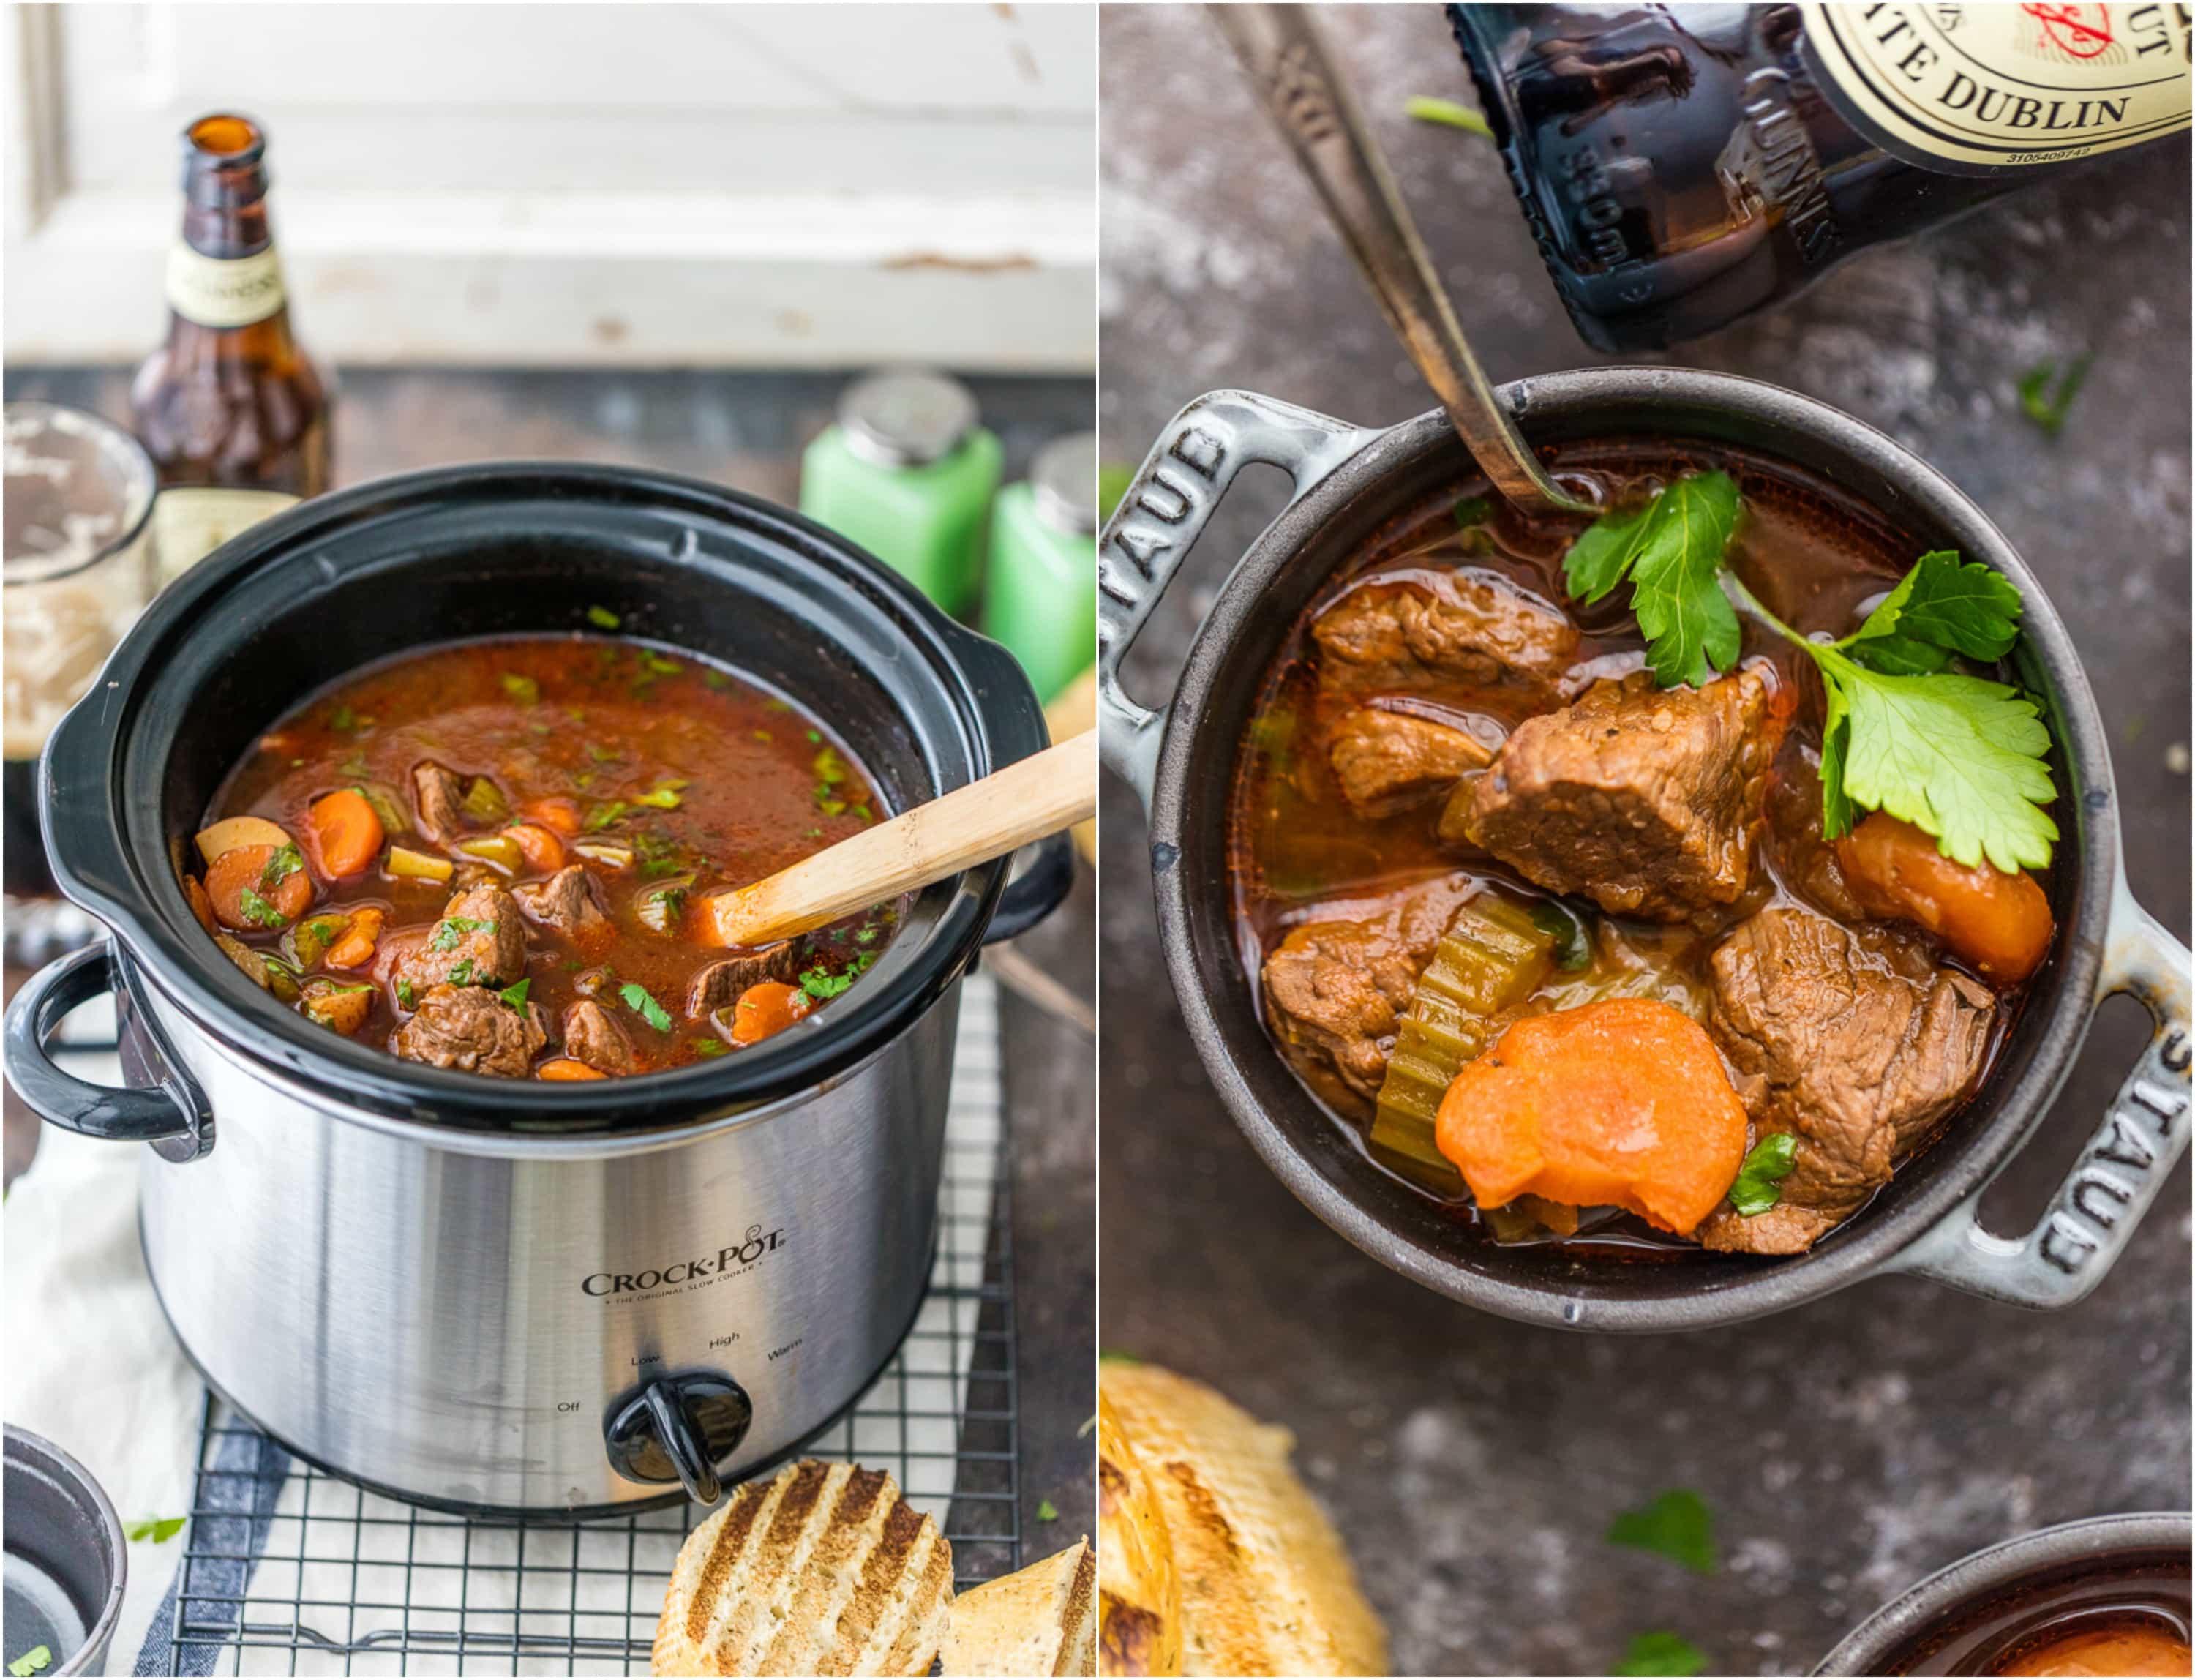 photo collage: left, beef stew in a crockpot; right, beef stew in a bowl